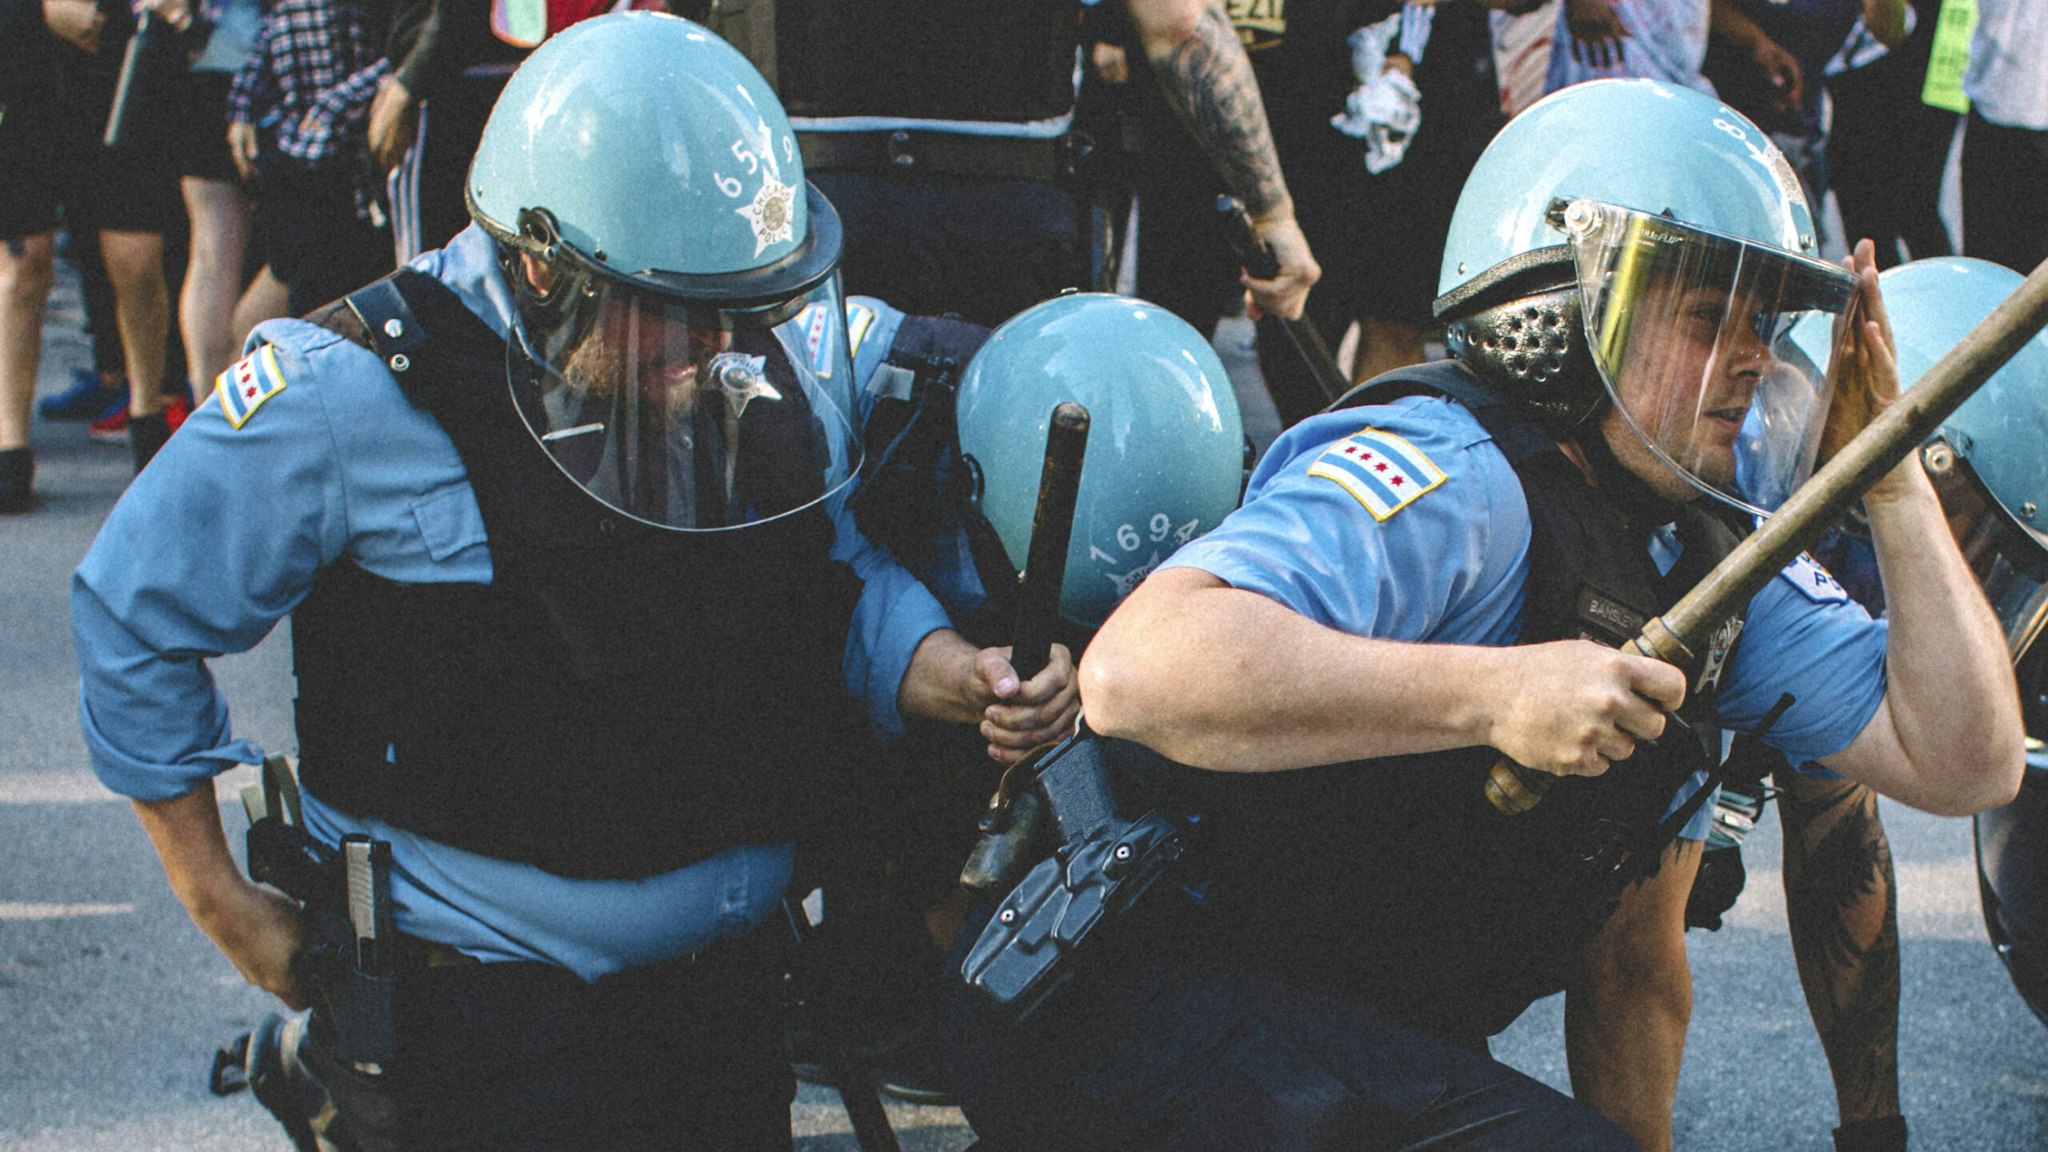 Protesters clash with police in Chicago , on May 30, 2020 during a protest against the death of George Floyd, an unarmed black man who died while while being arrested and pinned to the ground by the knee of a Minneapolis police officer.